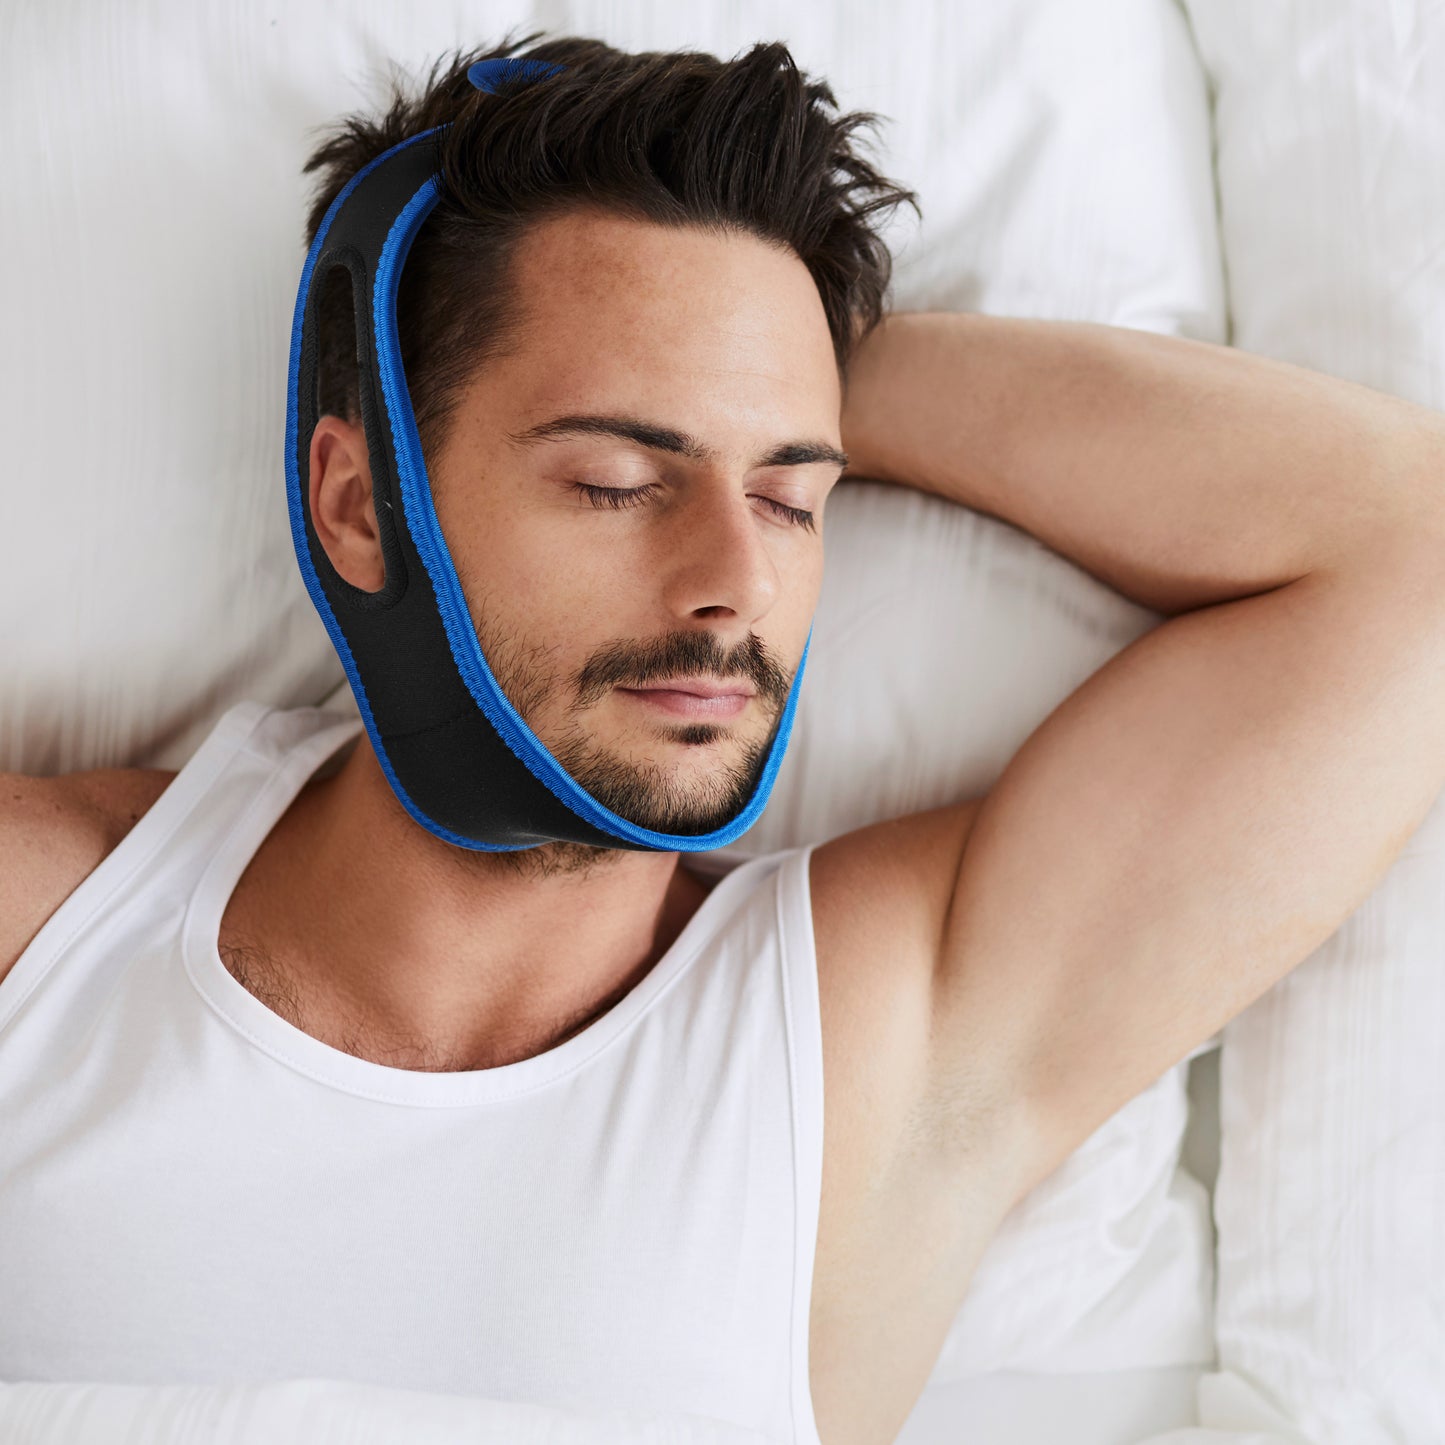 Anti Snoring Chin Strap - Snoring Solution, Effective Snore Stopper with Comfortable Neoprene for Better Sleep